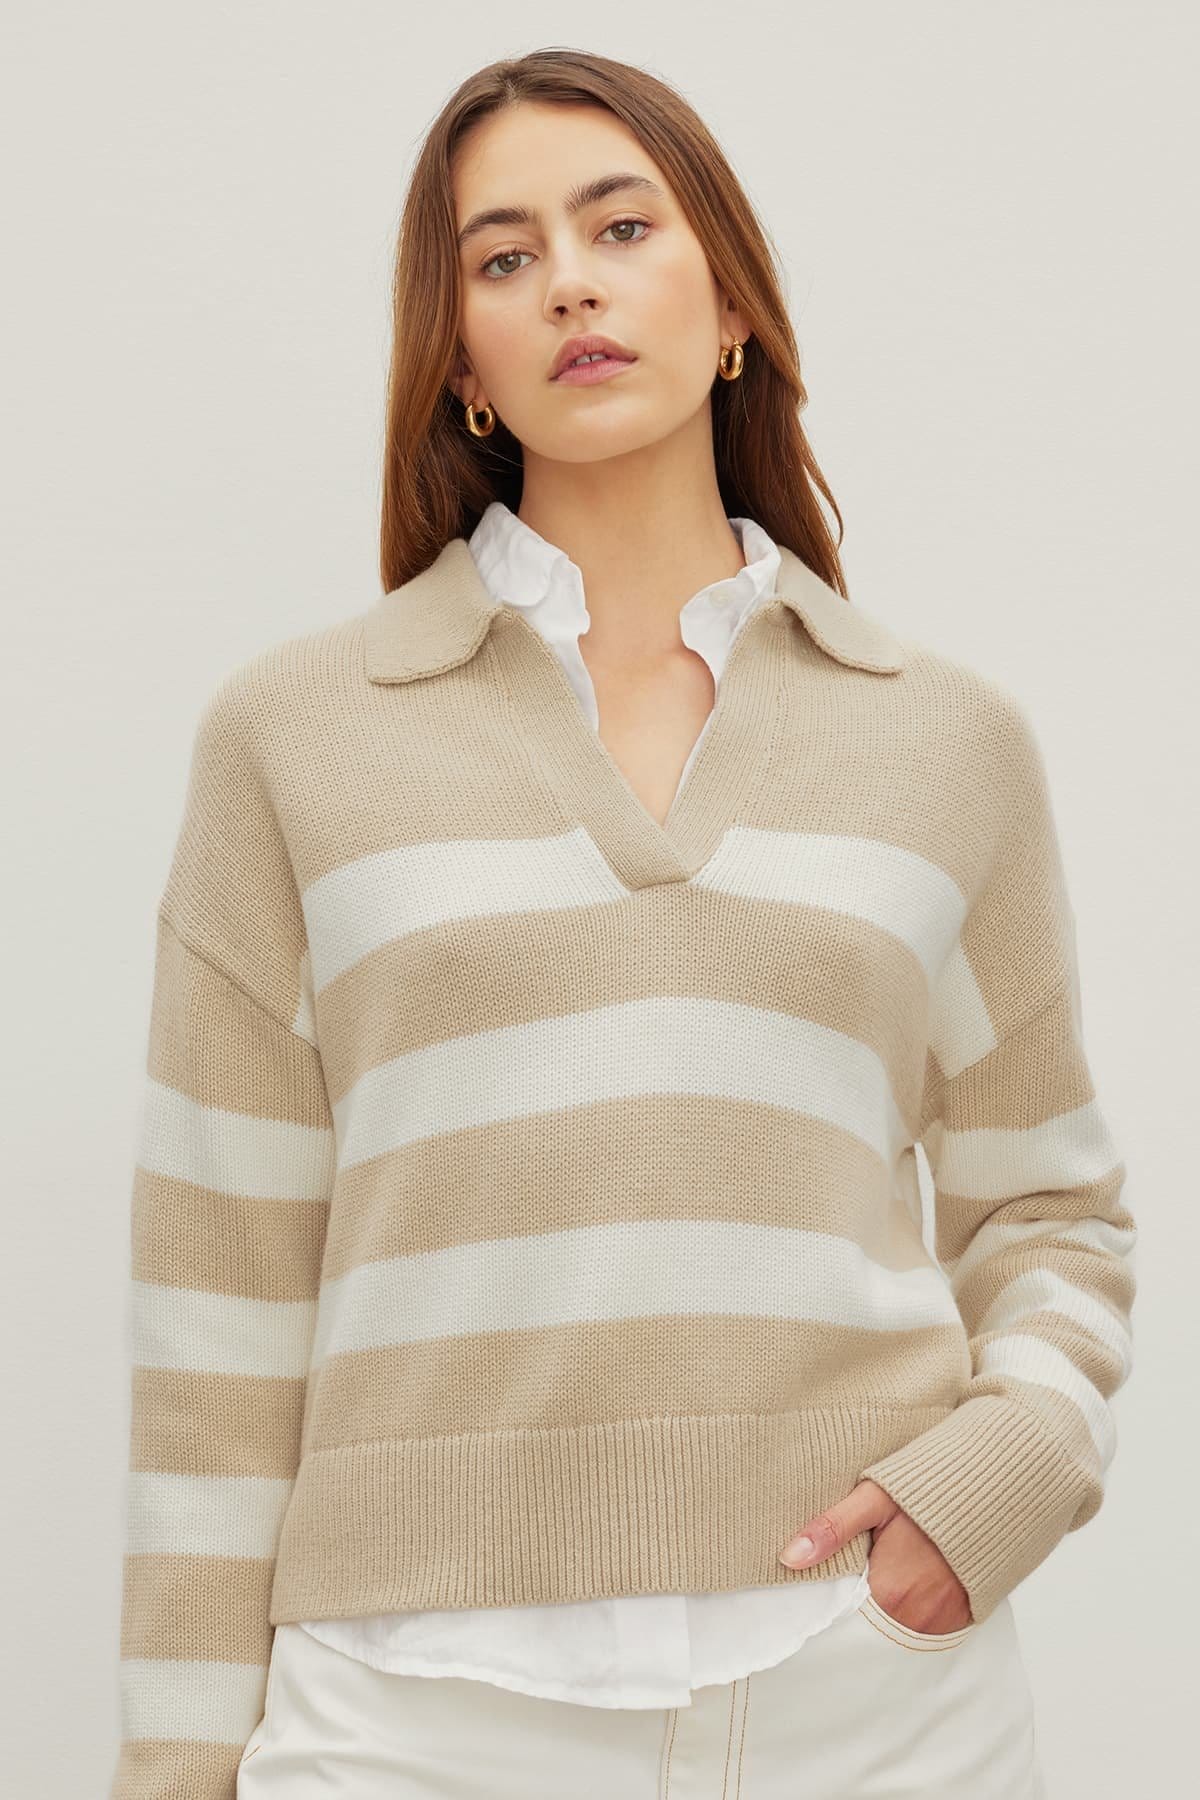 Model wearing the Lucie Sweater